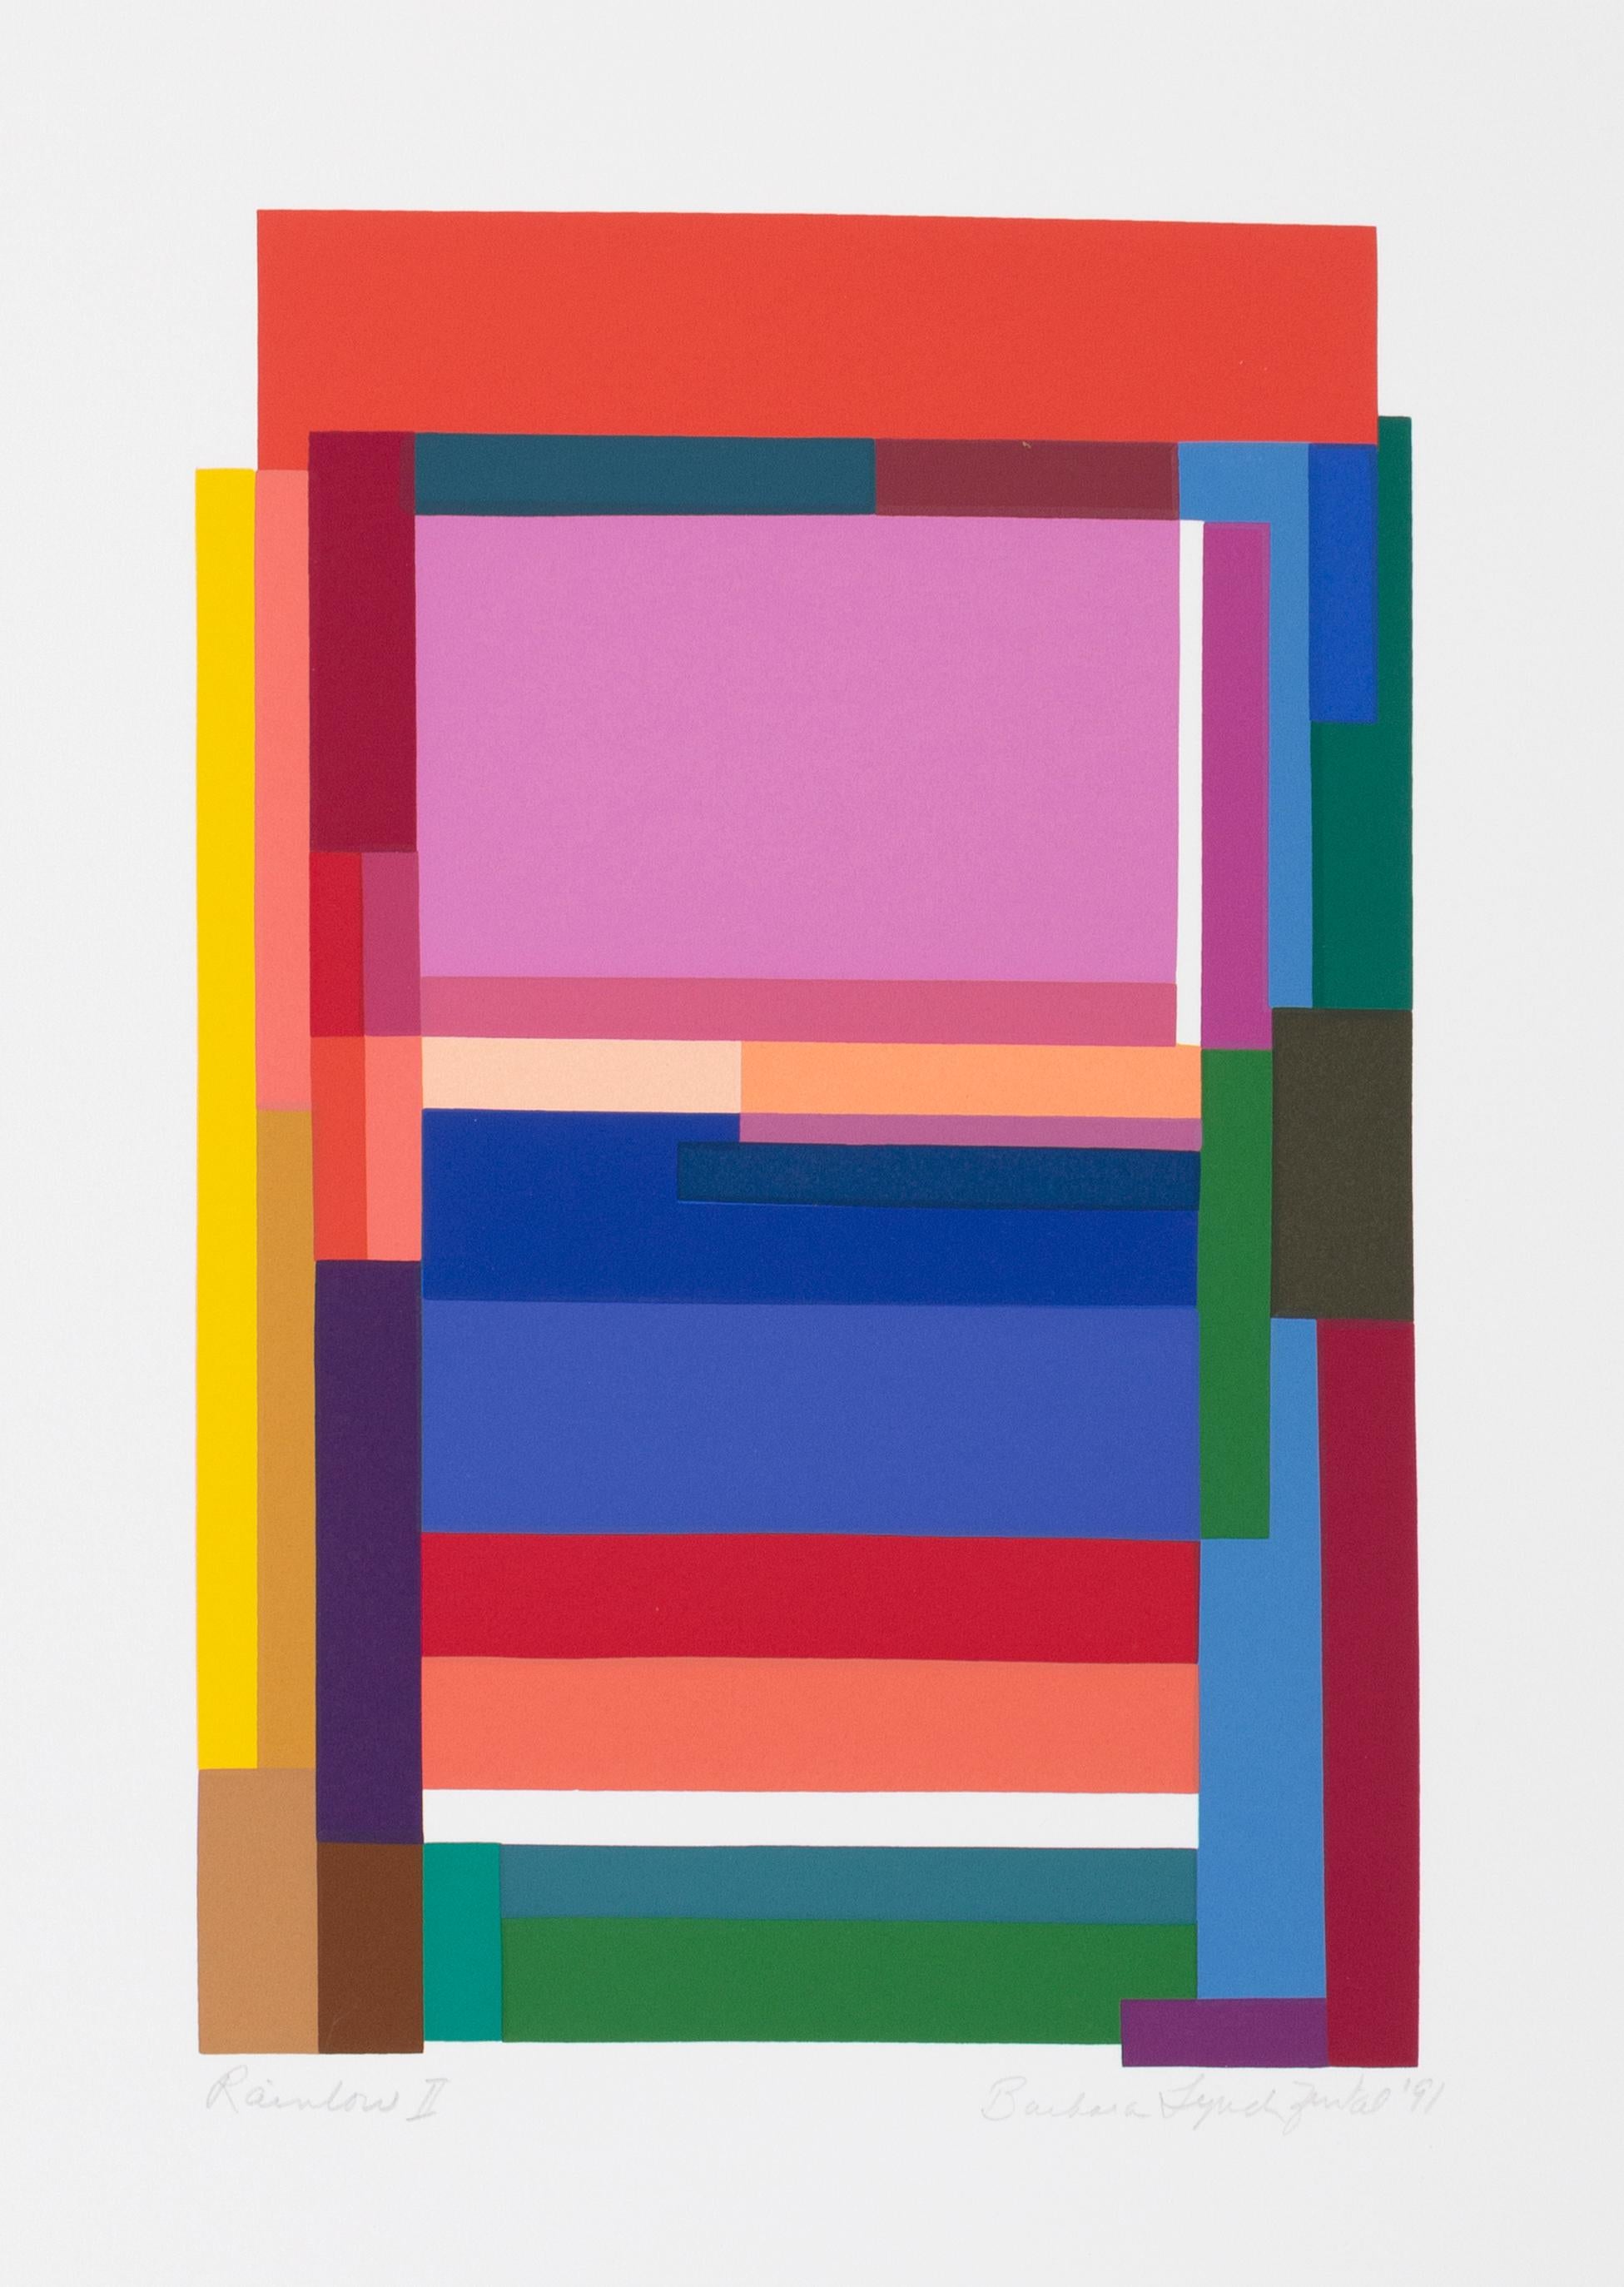 A colorful geometric screenprint by American artist Barbara Lynch Zinkel.

Date: 1991
Medium: Screenprint, numbered in pencil lower left, estate stamped verso
Edition: 250
Image Size: 12 x 7.5 inches
Size : 16 x 10 in. (40.64 x 25.4 cm)